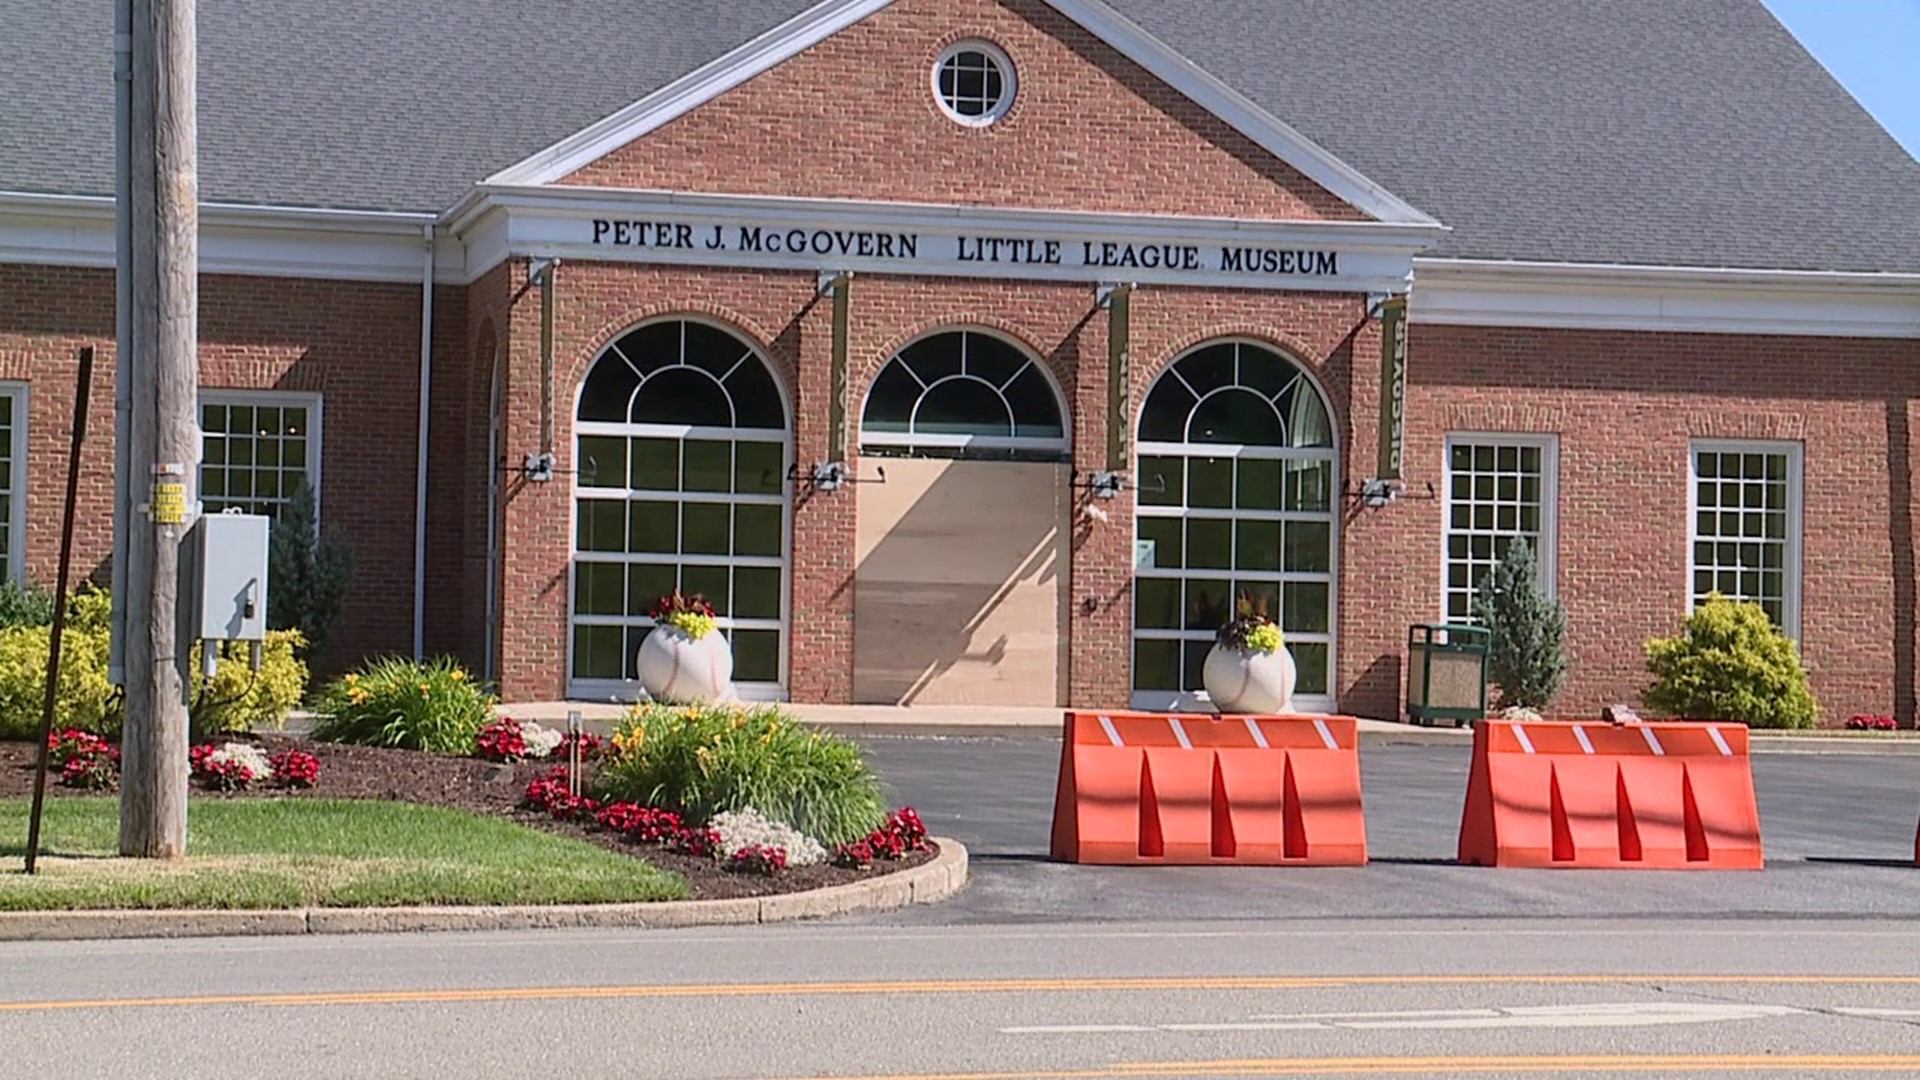 A woman is locked up in Lycoming County, accused of trying to destroy the World of Little League Museum Sunday afternoon.